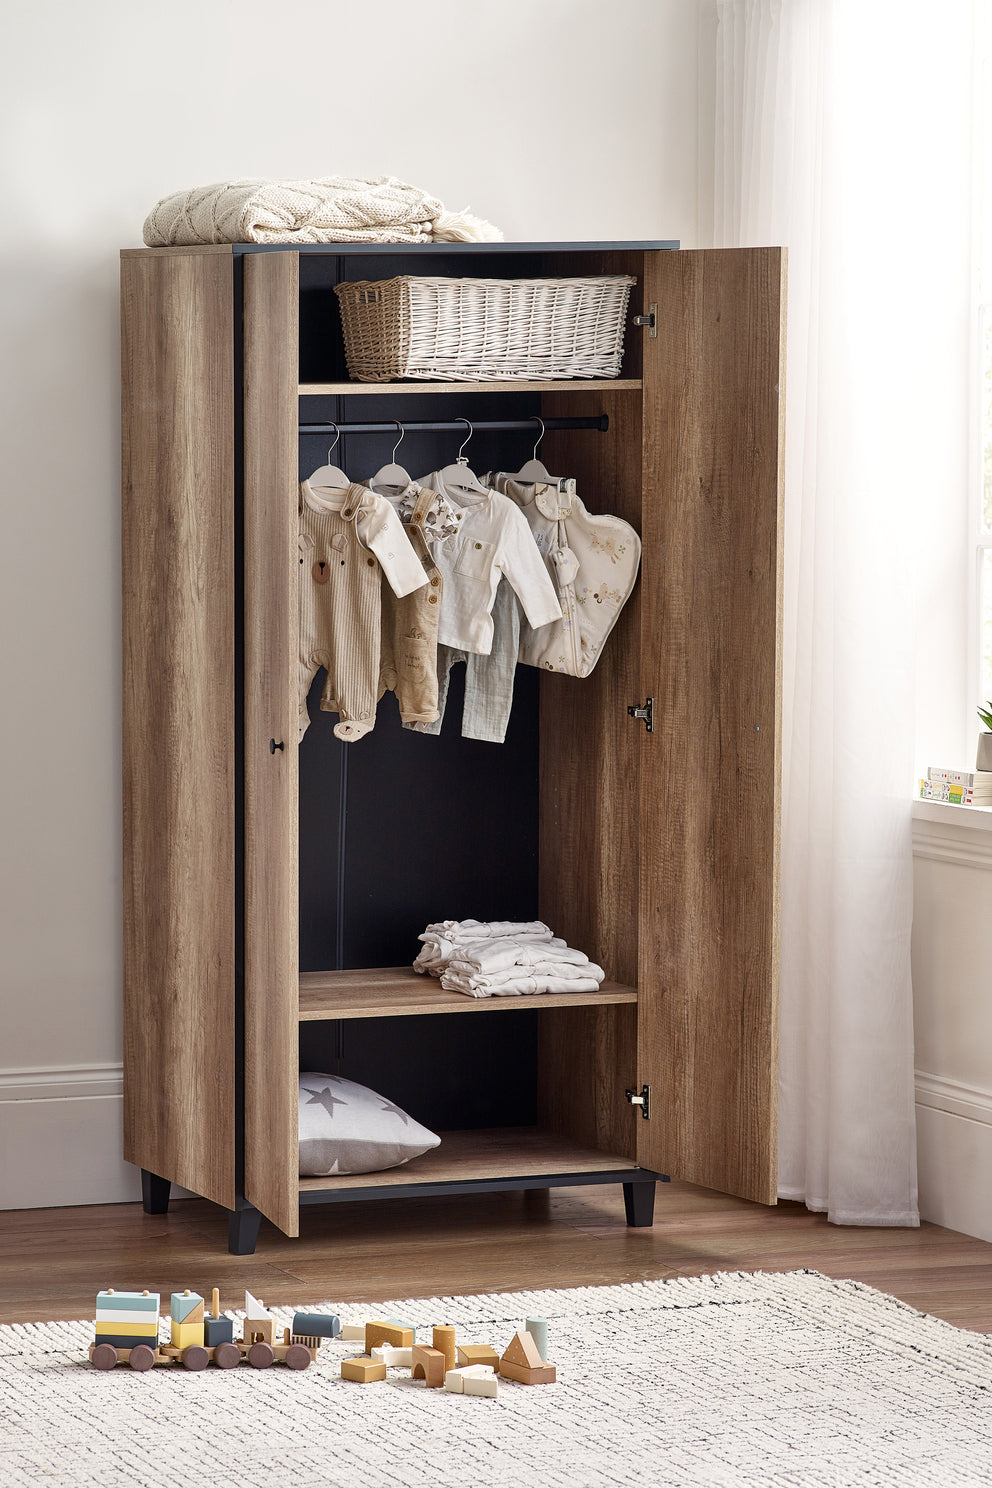 Babystyle Montana Wardrobe - For Your Little One